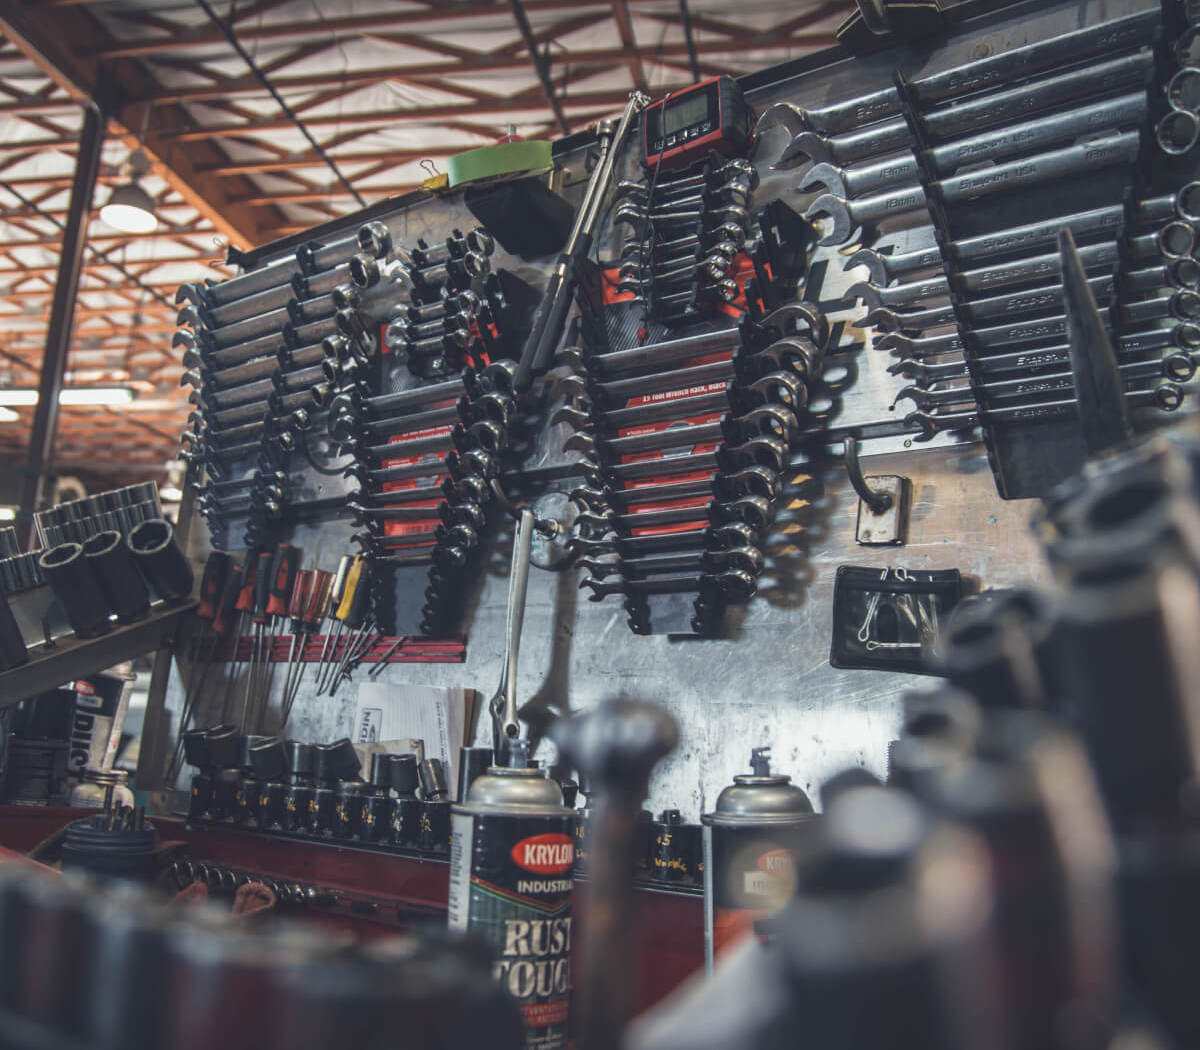 13 Auto Repair Marketing Ideas to Capture Leads and Loyalty